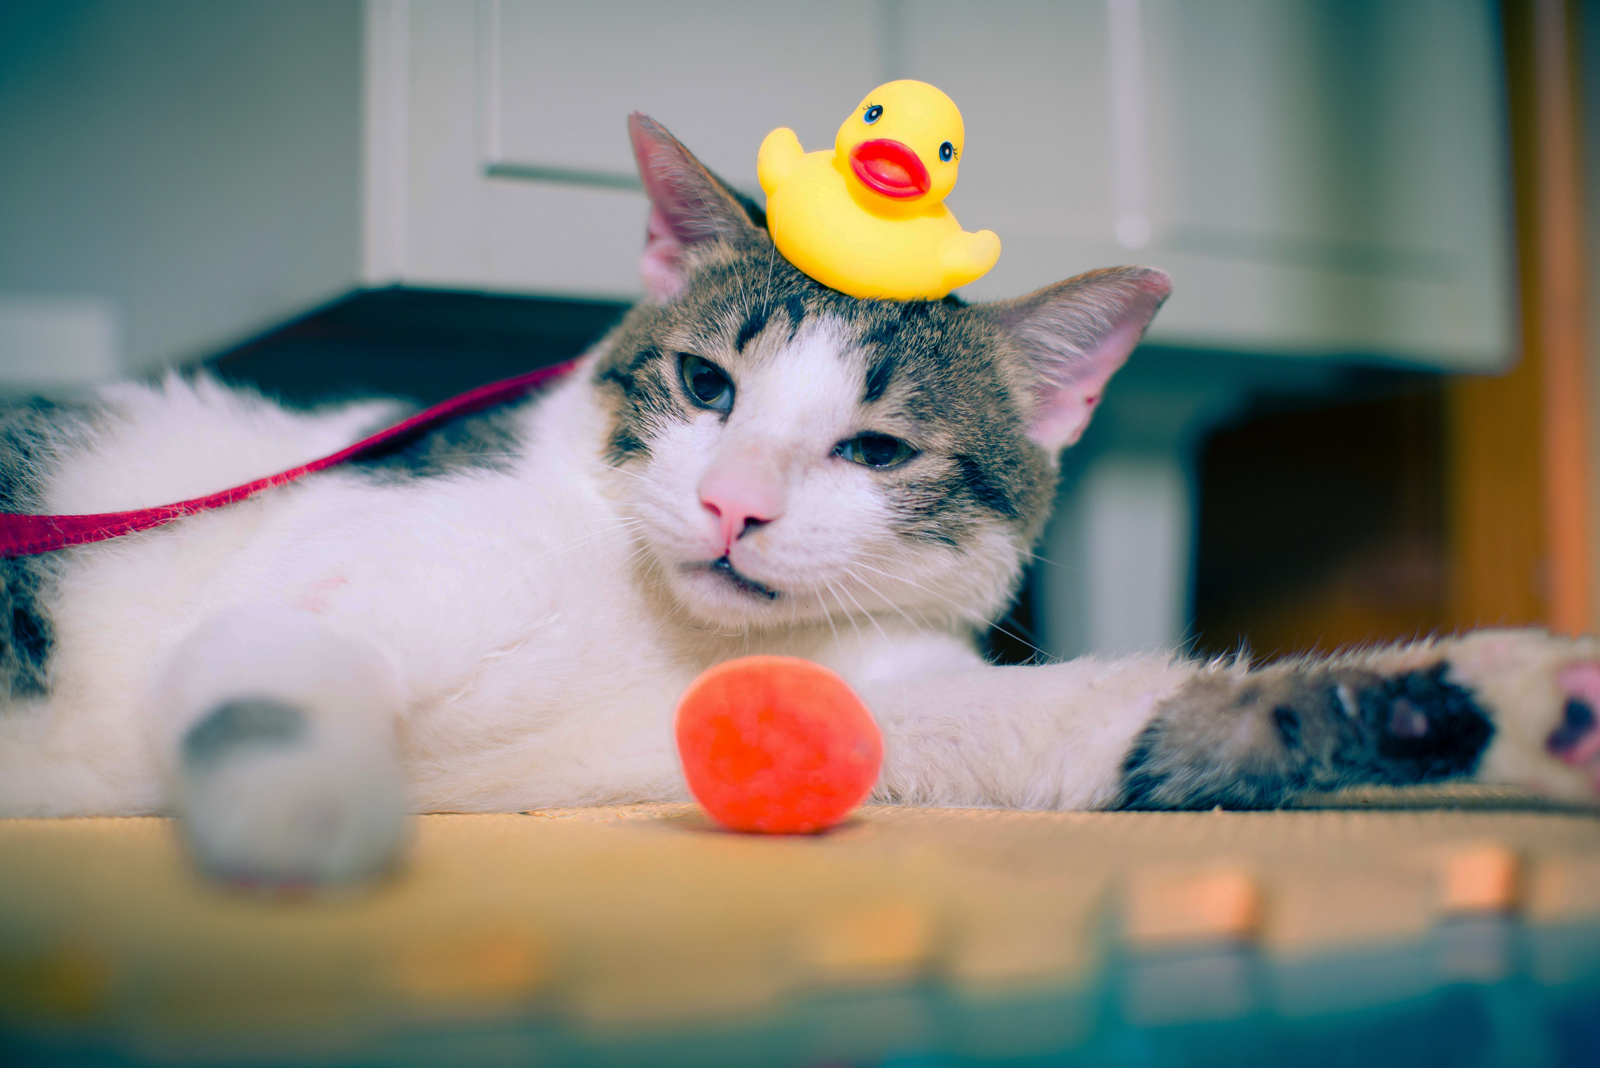 A cat playing with toys with a rubbe rduck on its head